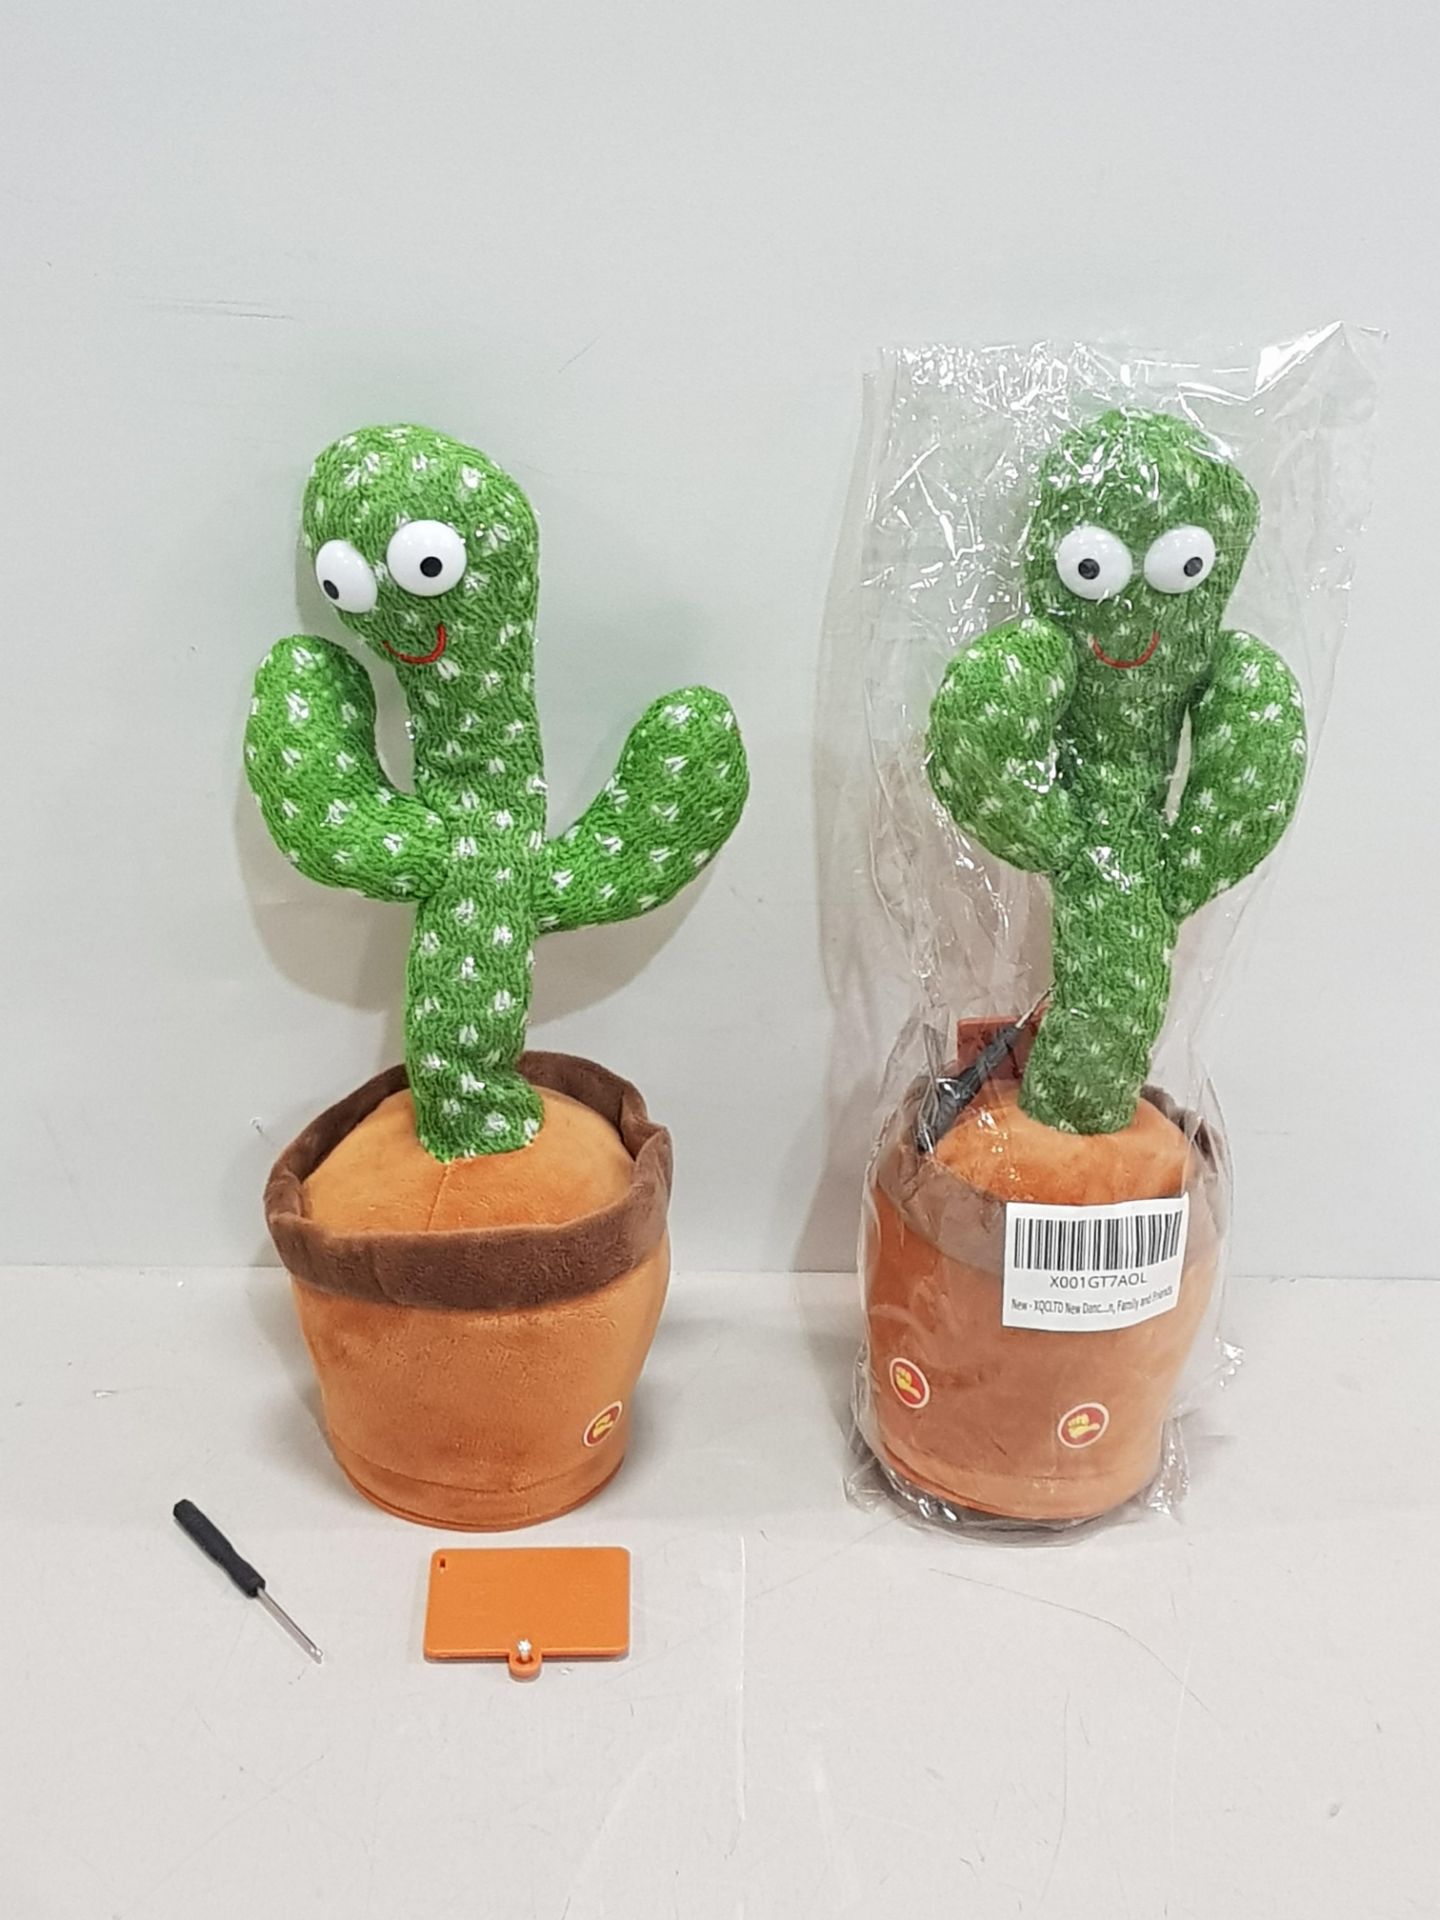 100 X BRAND NEW LED LIGHT UP DANCING / SINGING / TALKING CACTUS TOYS - 120 ENGLISH SONGS - RECORDS